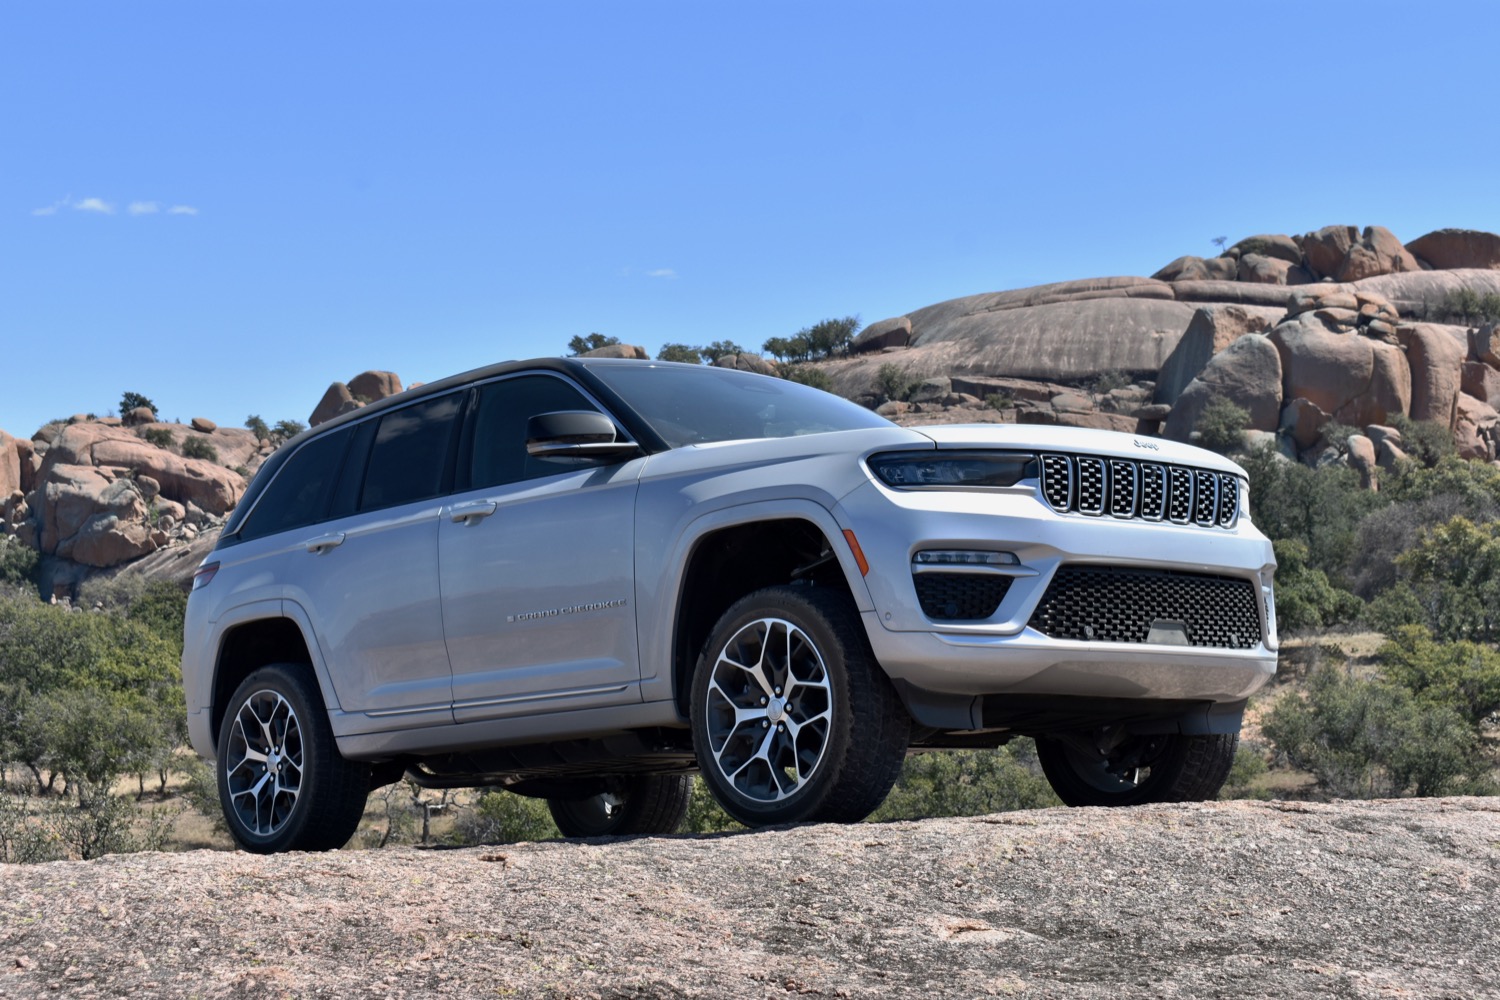 Jeep Grand Cherokee 4xe first drive review: Do-it-all plug-in